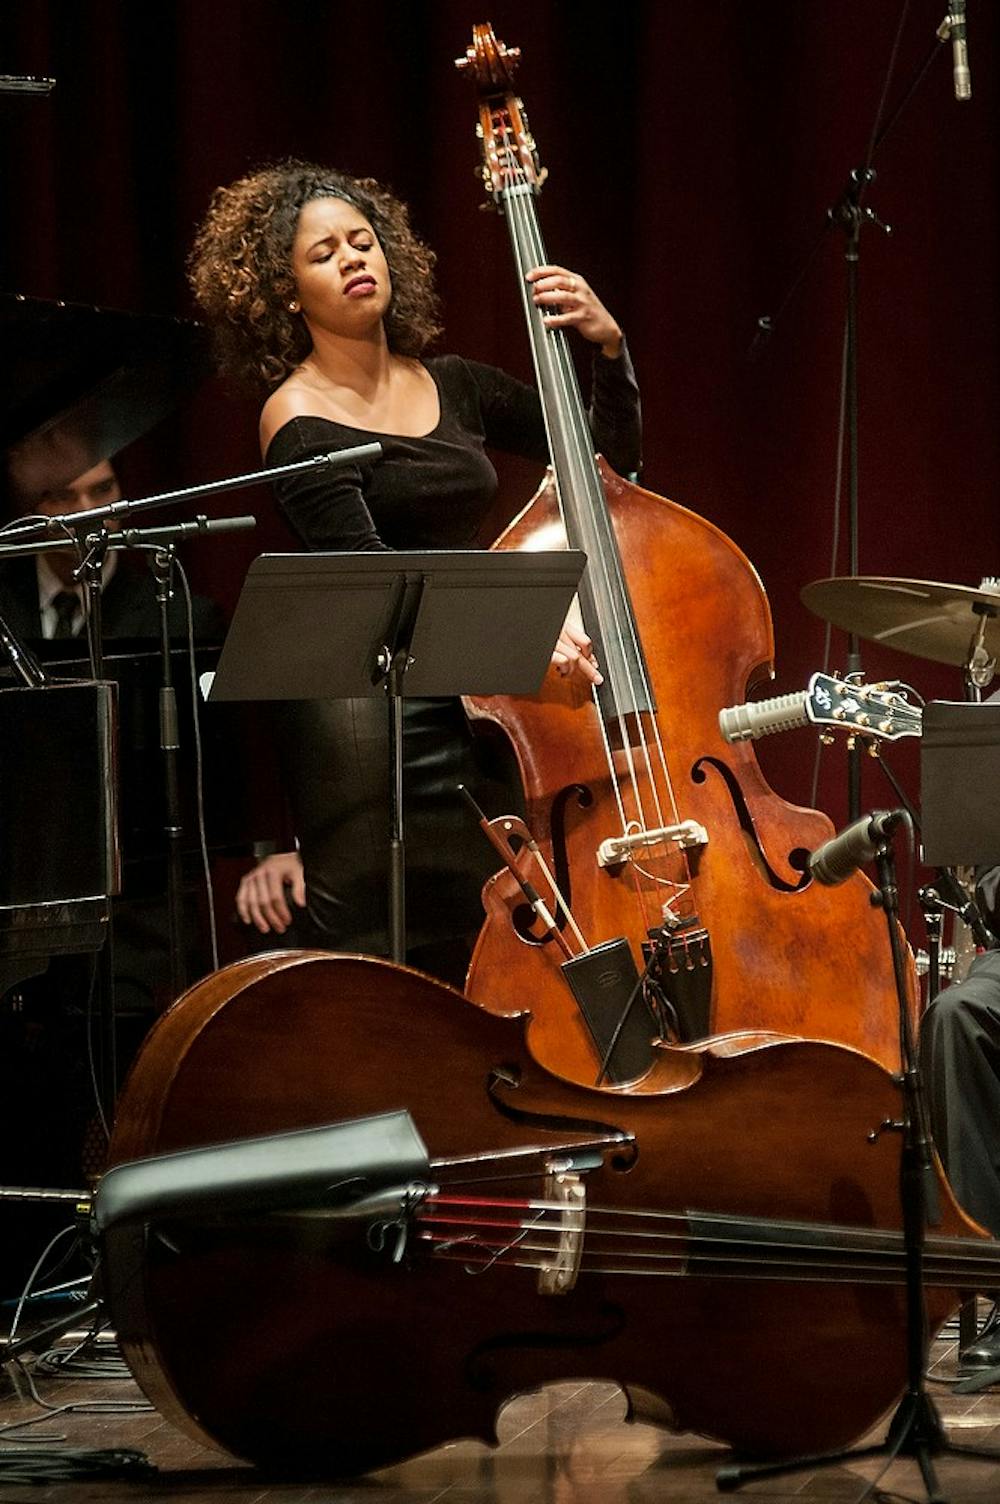 <p>Doctoral student and bassist Anessa Al-Musawwir performs during the MSU Federal Credit Union Jazz Artist in Residence show on Oct. 10, 2014, at Fairchild Theater in the Auditorium building. Al-Musawwir is a member of MSU Jazz Orchestra II. Raymond Williams/The State News</p>